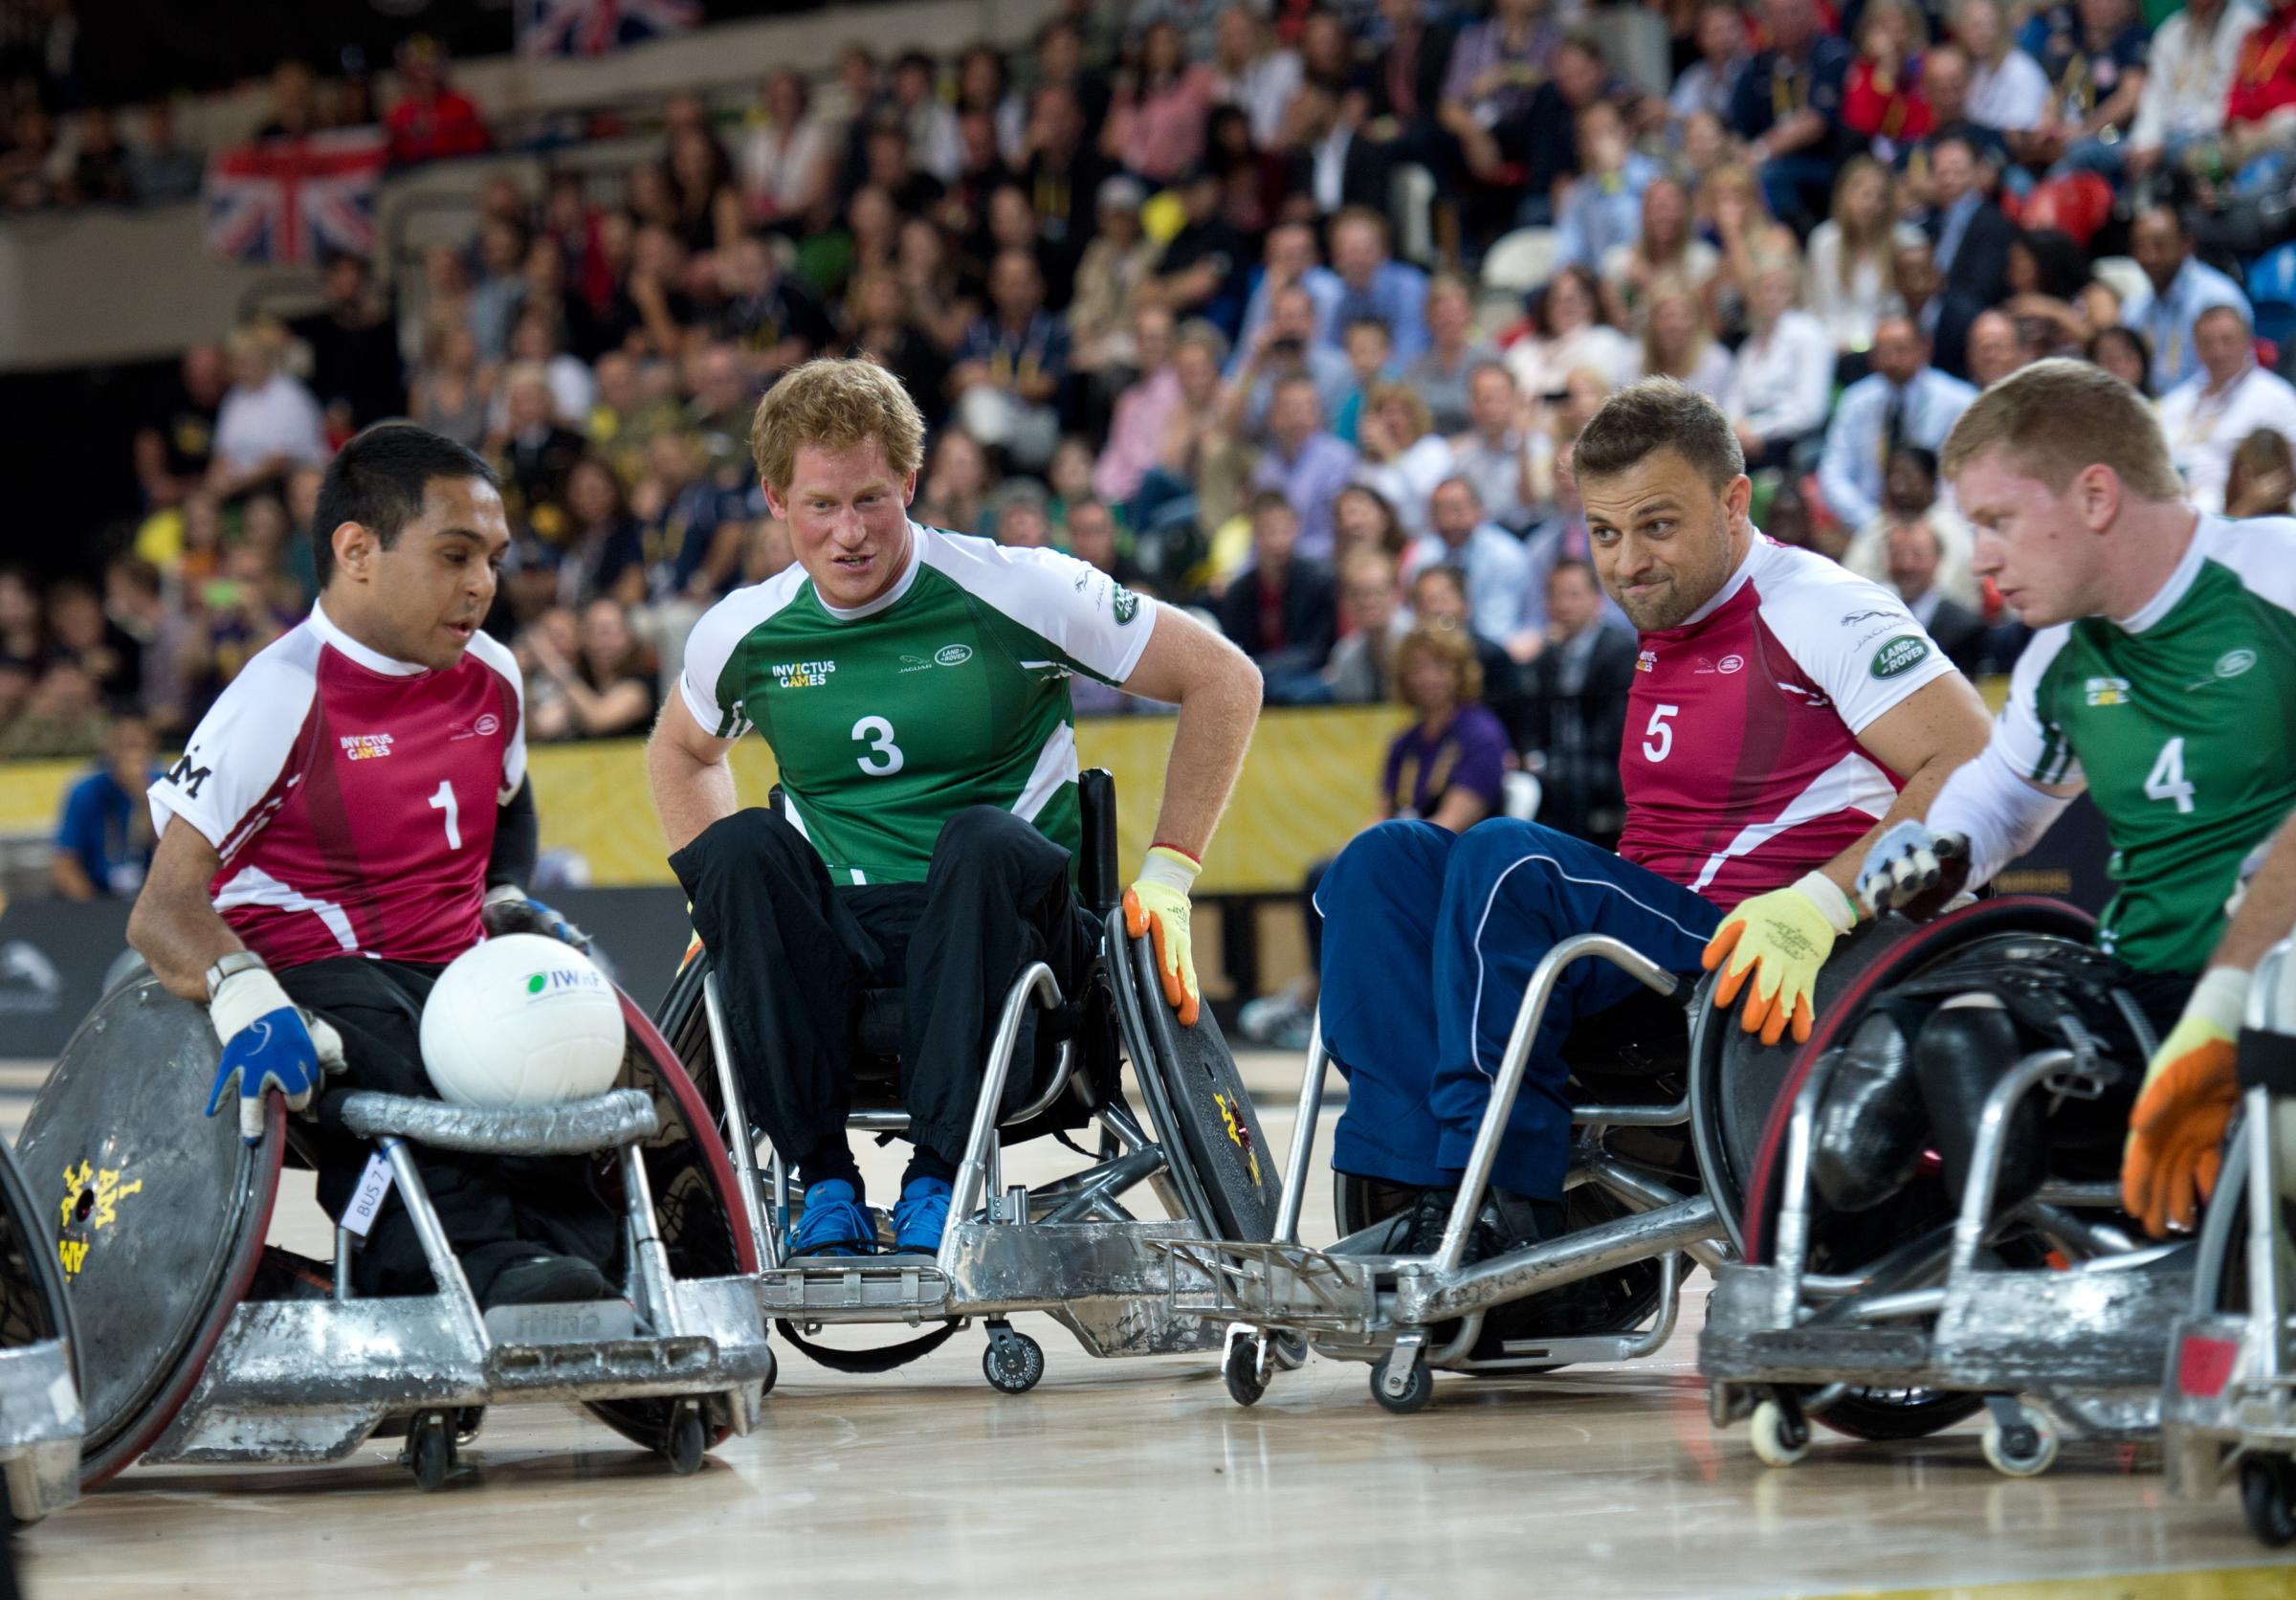 UK - "Invictus Games" Wheelchair Rugby in London